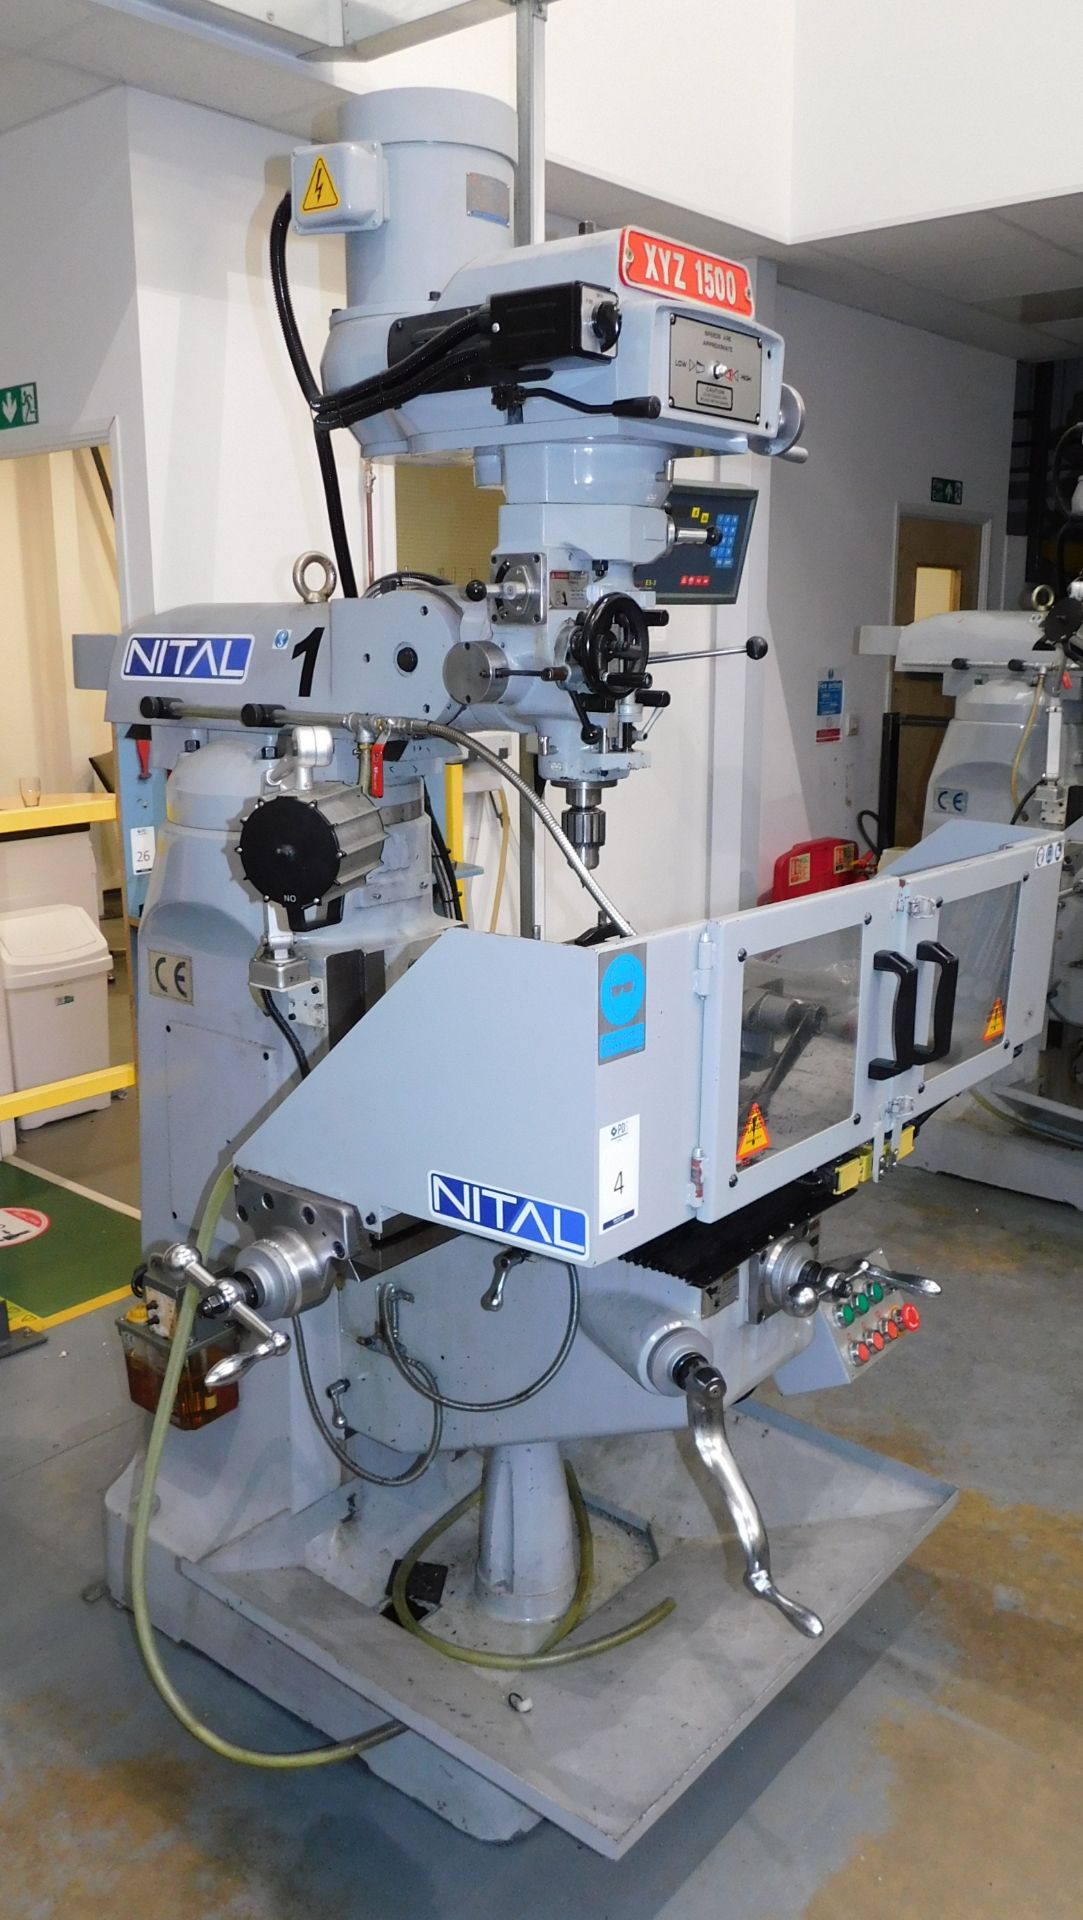 XYZ 1500 Turret Mill (2015), serial number 104012, 3 HP Variable Speed Head, 1069 x 228mm Table & - Image 8 of 9